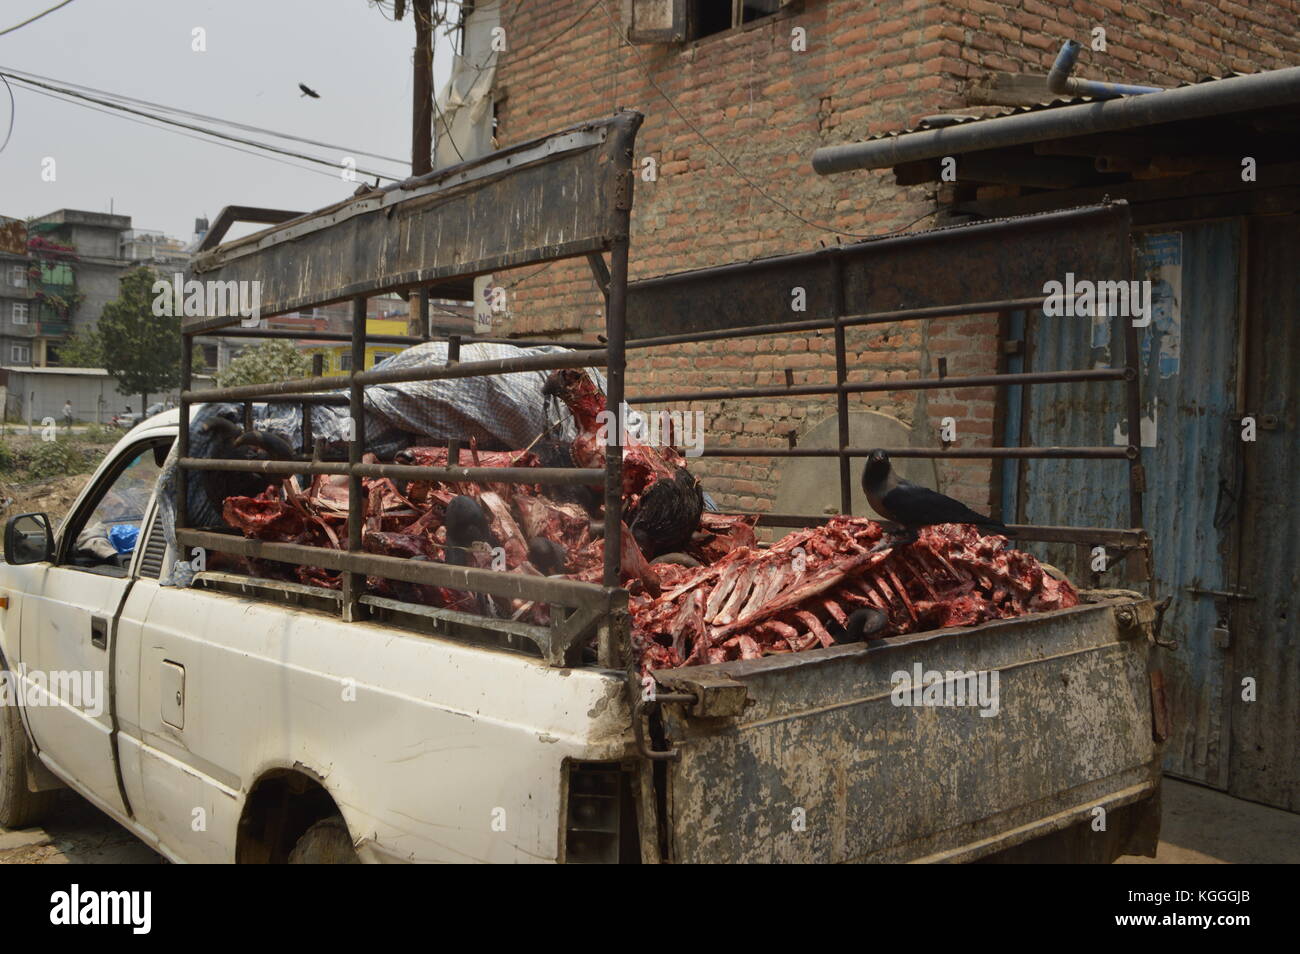 A truck full of bones and cadavers with a bird sitting on a rib cage. A Dalit low caste neighbourhood producing meat, industry. untouchables Stock Photo